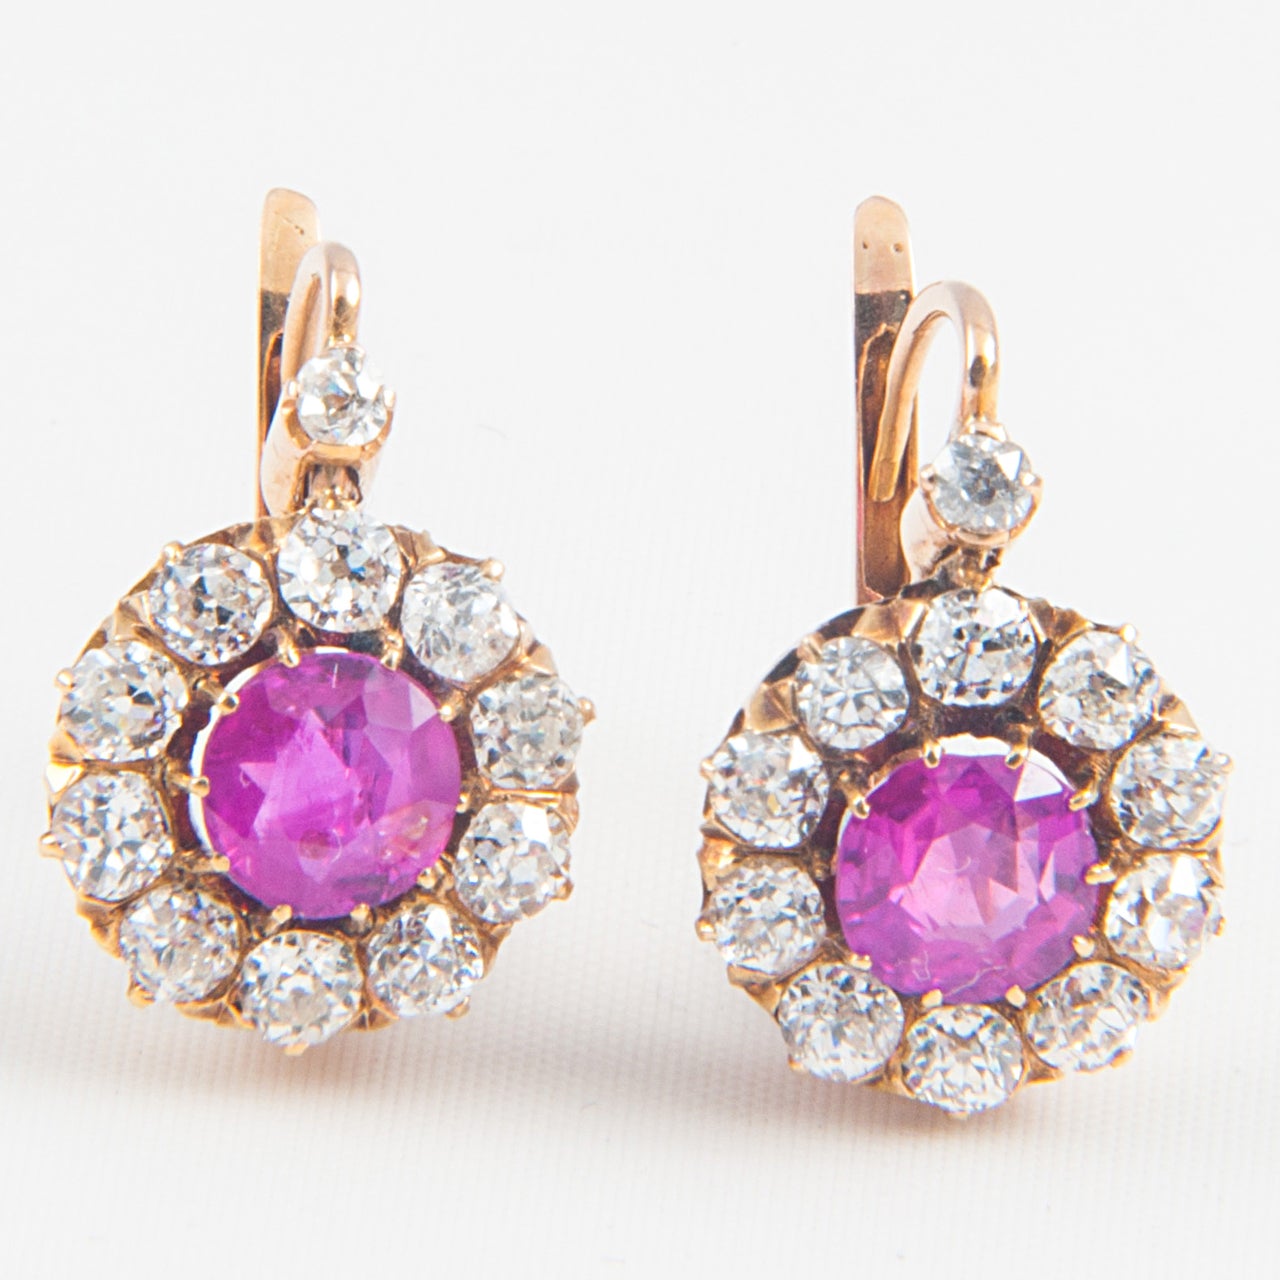 Pink Sapphire and Diamond Cluster earrings with hook and clip fitting. Old cut Diamonds.